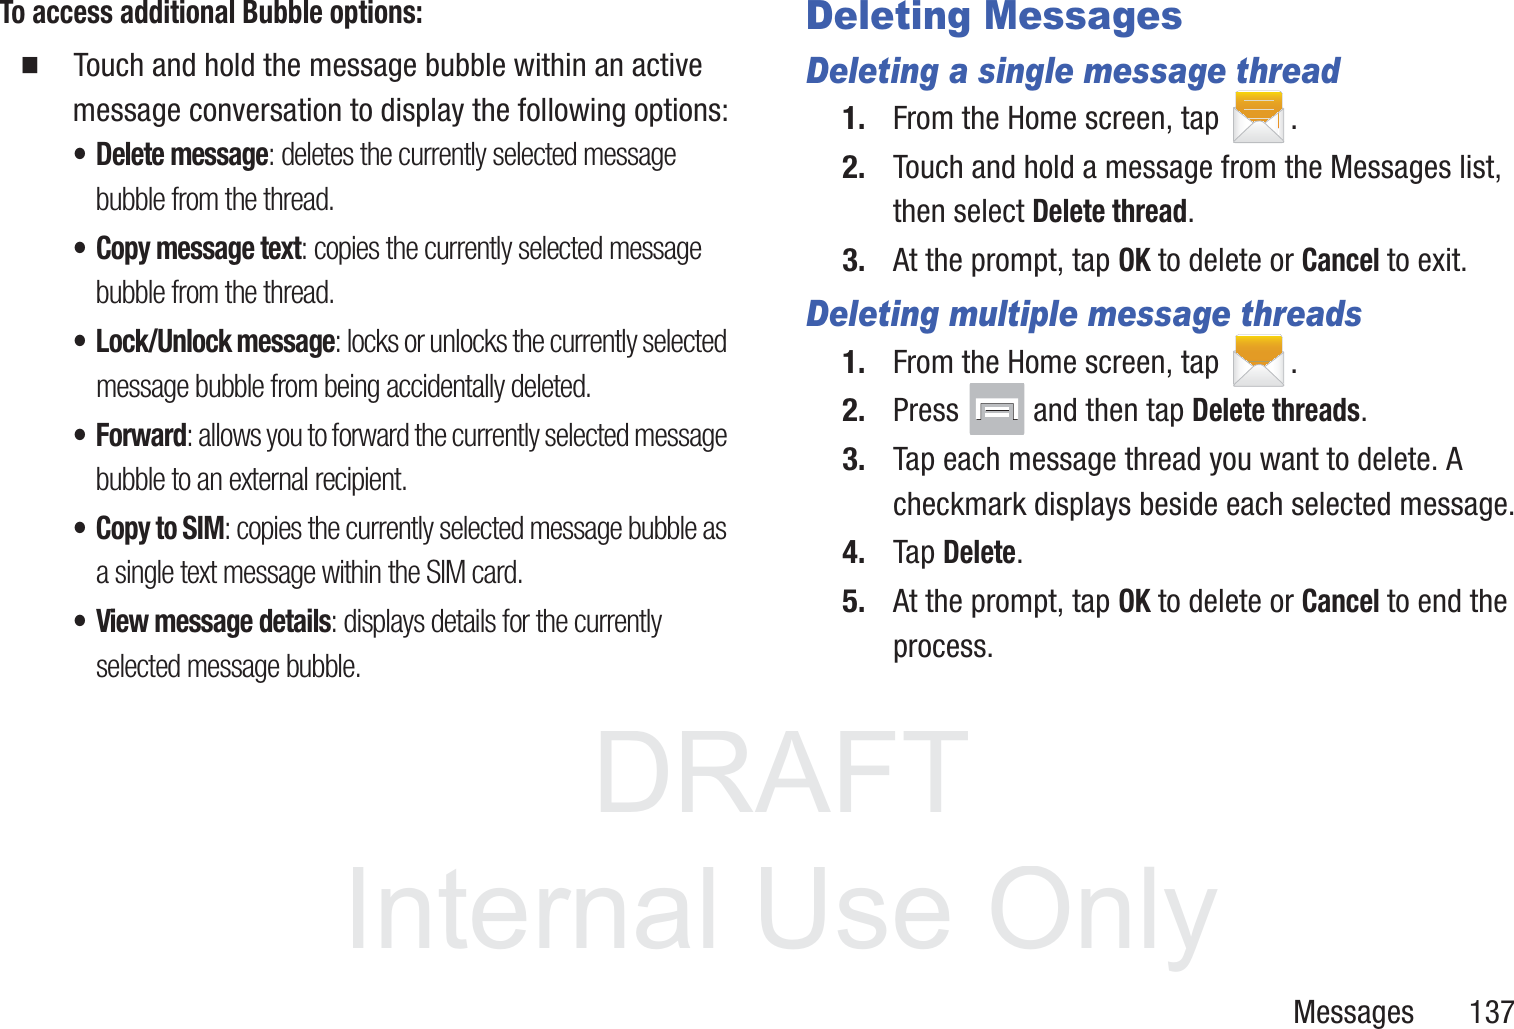 DRAFT InternalUse OnlyMessages       137To access additional Bubble options:䡲  Touch and hold the message bubble within an active message conversation to display the following options:• Delete message: deletes the currently selected message bubble from the thread.• Copy message text: copies the currently selected message bubble from the thread.• Lock/Unlock message: locks or unlocks the currently selected message bubble from being accidentally deleted.• Forward: allows you to forward the currently selected message bubble to an external recipient.• Copy to SIM: copies the currently selected message bubble as a single text message within the SIM card.• View message details: displays details for the currently selected message bubble.Deleting MessagesDeleting a single message thread1. From the Home screen, tap  .2. Touch and hold a message from the Messages list, then select Delete thread.3. At the prompt, tap OK to delete or Cancel to exit.Deleting multiple message threads1. From the Home screen, tap  .2. Press   and then tap Delete threads.3. Tap each message thread you want to delete. A checkmark displays beside each selected message.4. Tap Delete.5. At the prompt, tap OK to delete or Cancel to end the process.